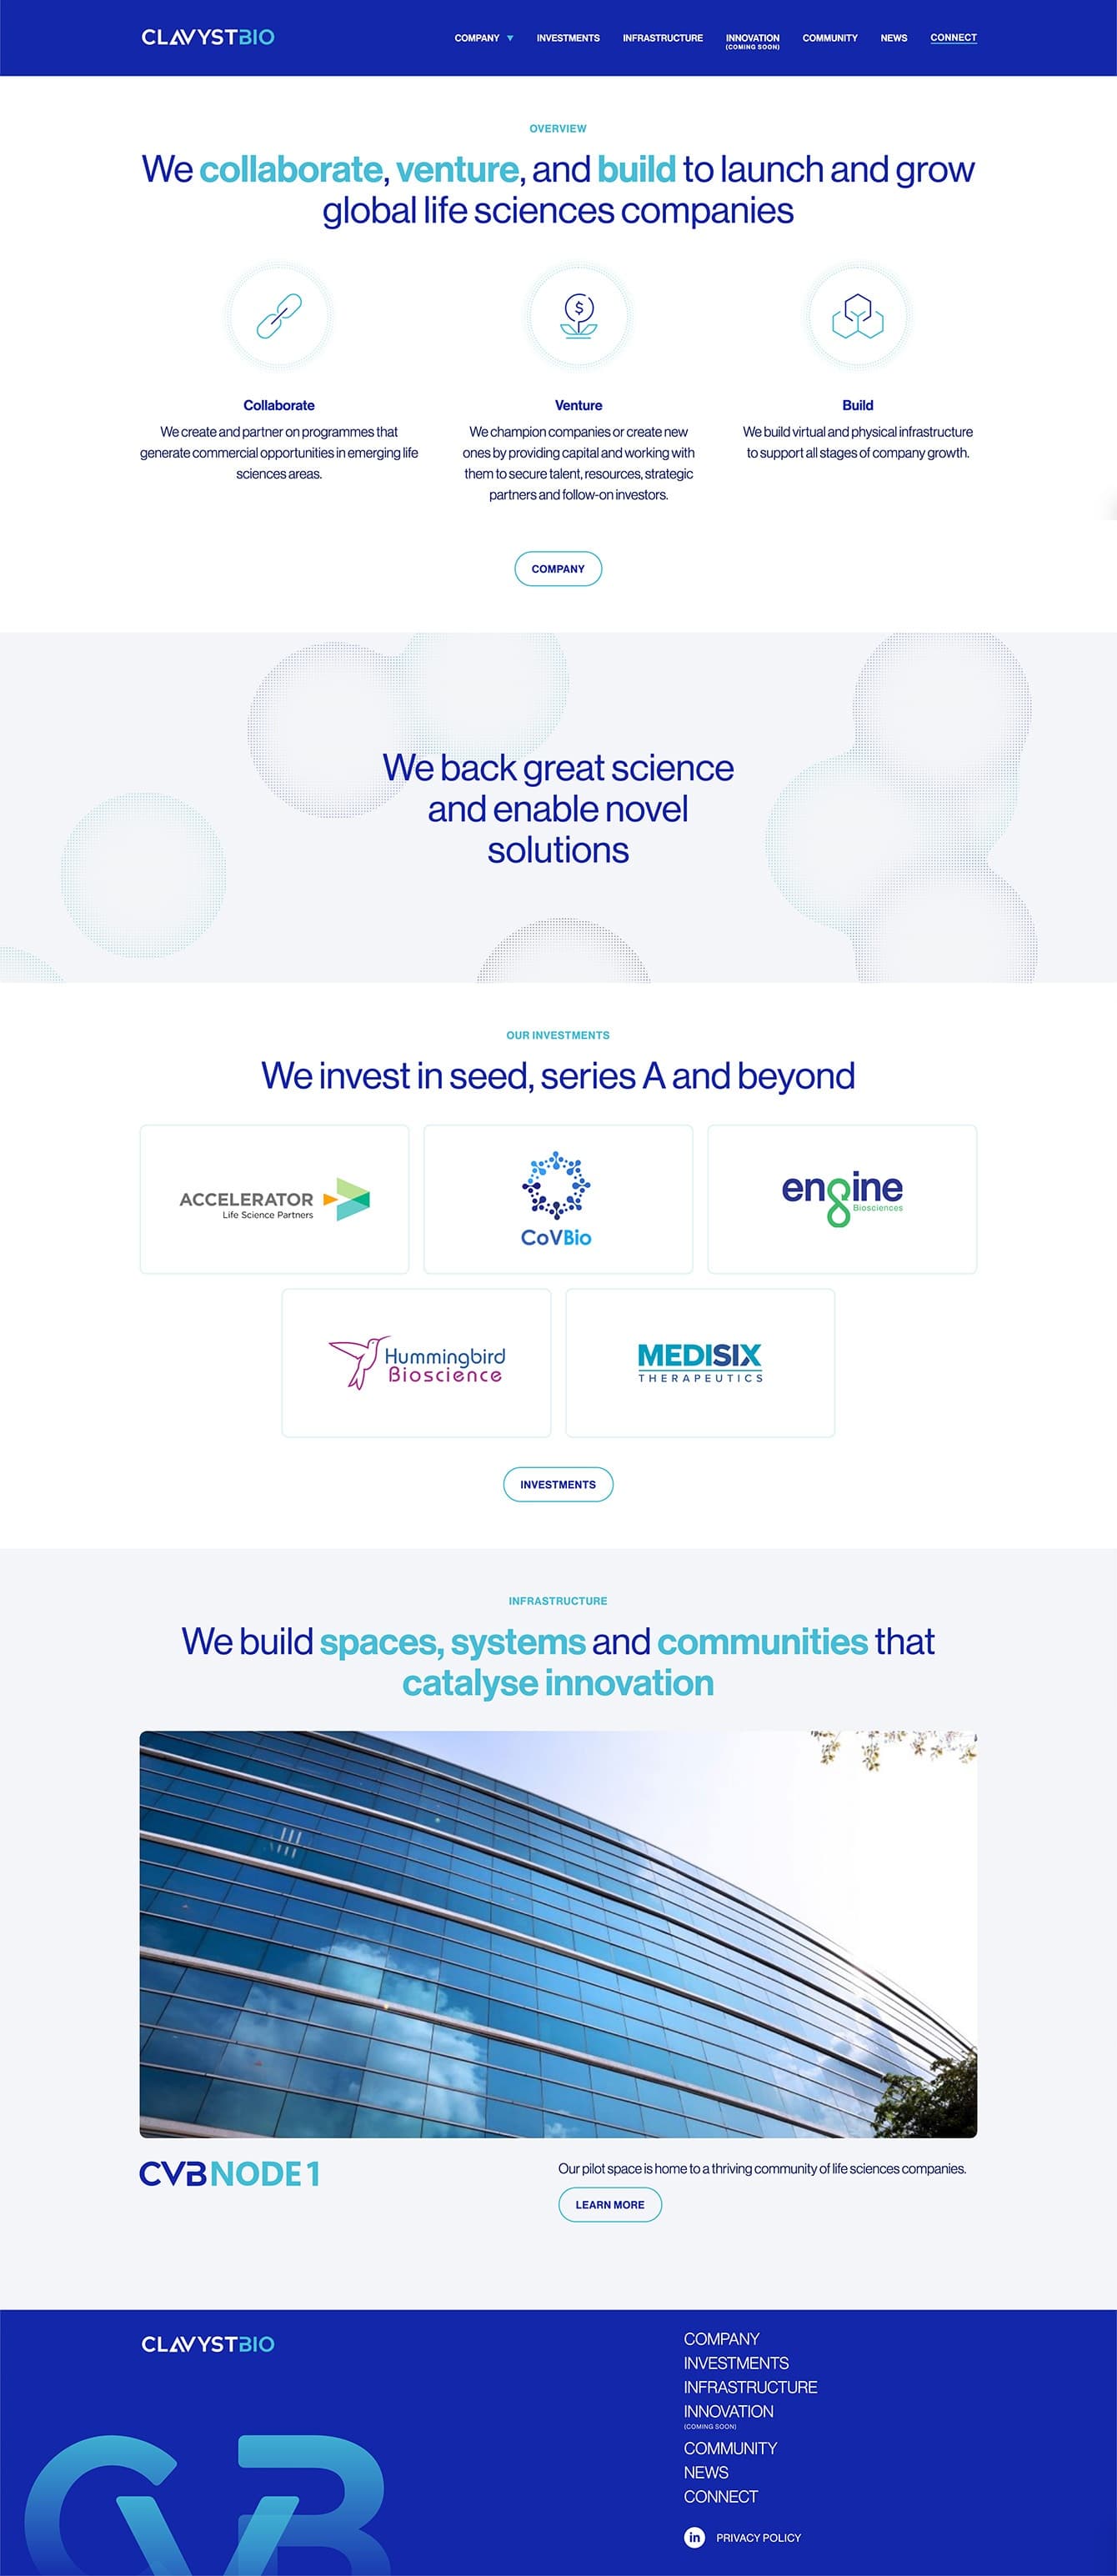 Project - Clavystbio Homepage